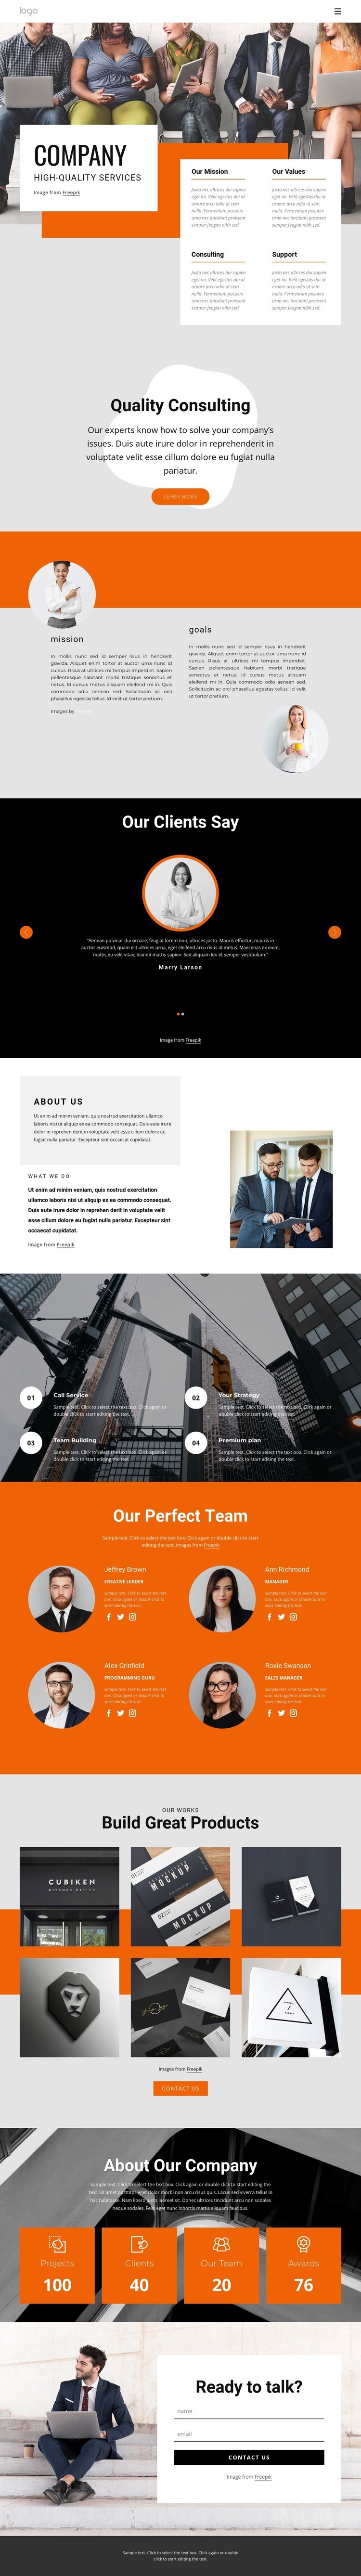 Hight quality consulting firm Elementor Template Alternative